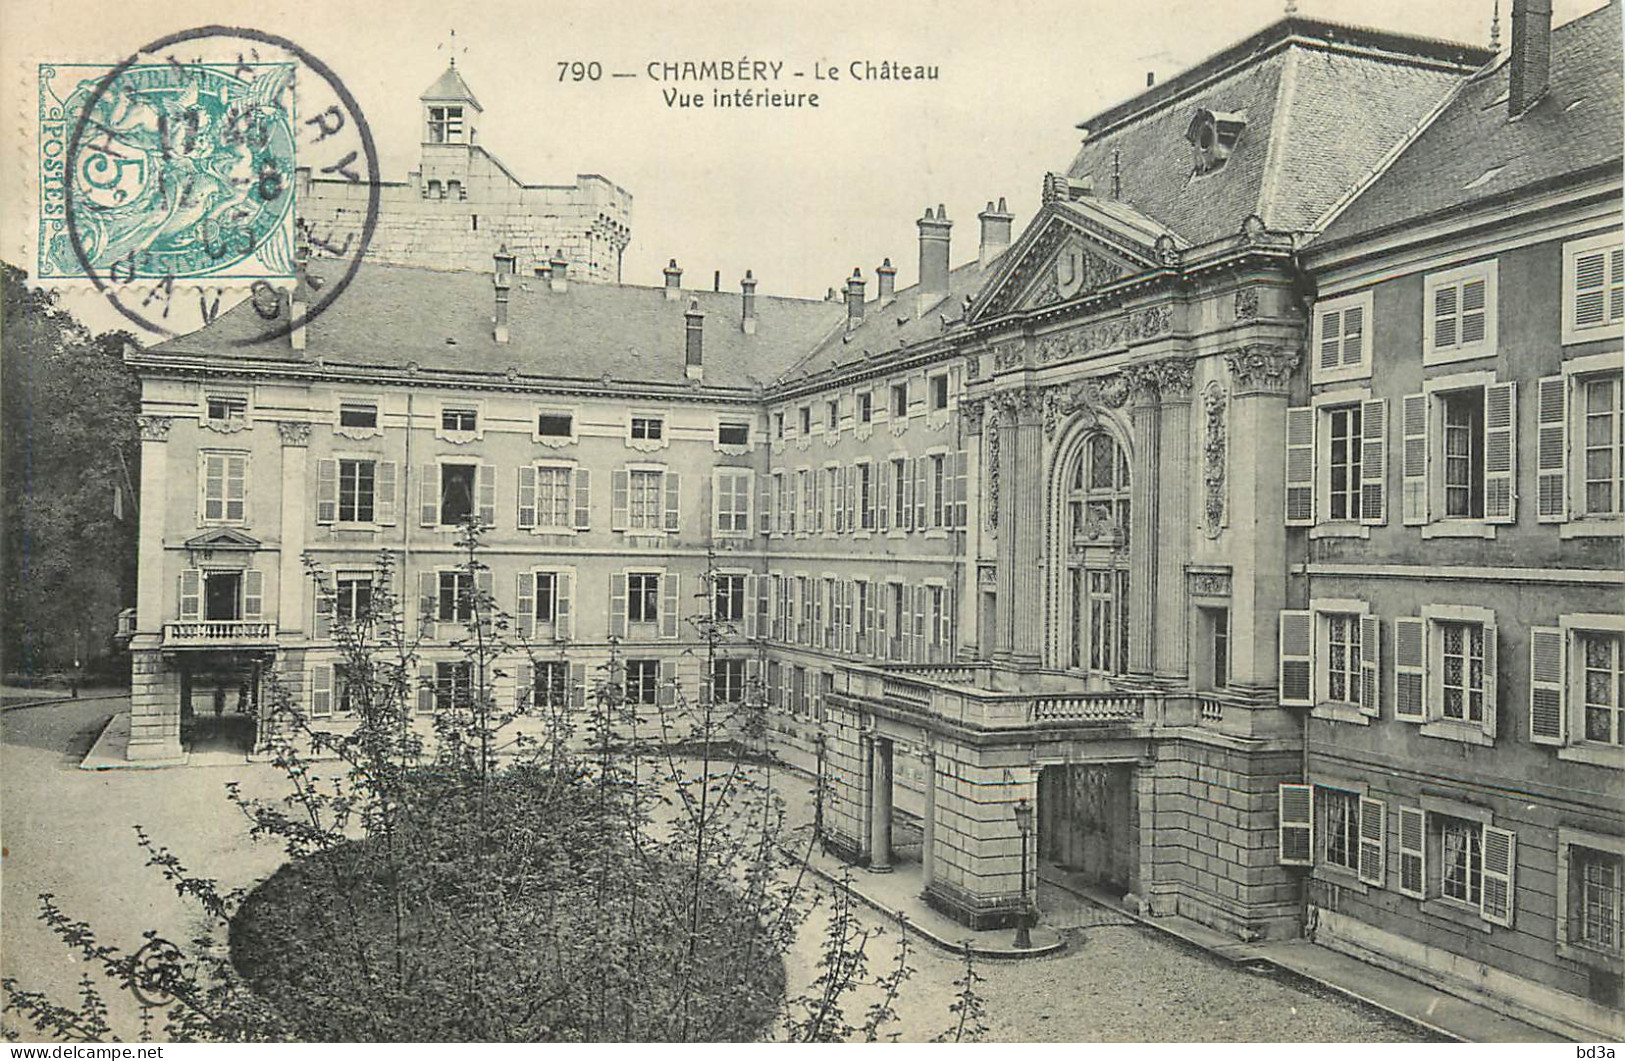 73 - CHAMBERY - LE  CHÂTEAU - VUE INTERIEURE - Chambery